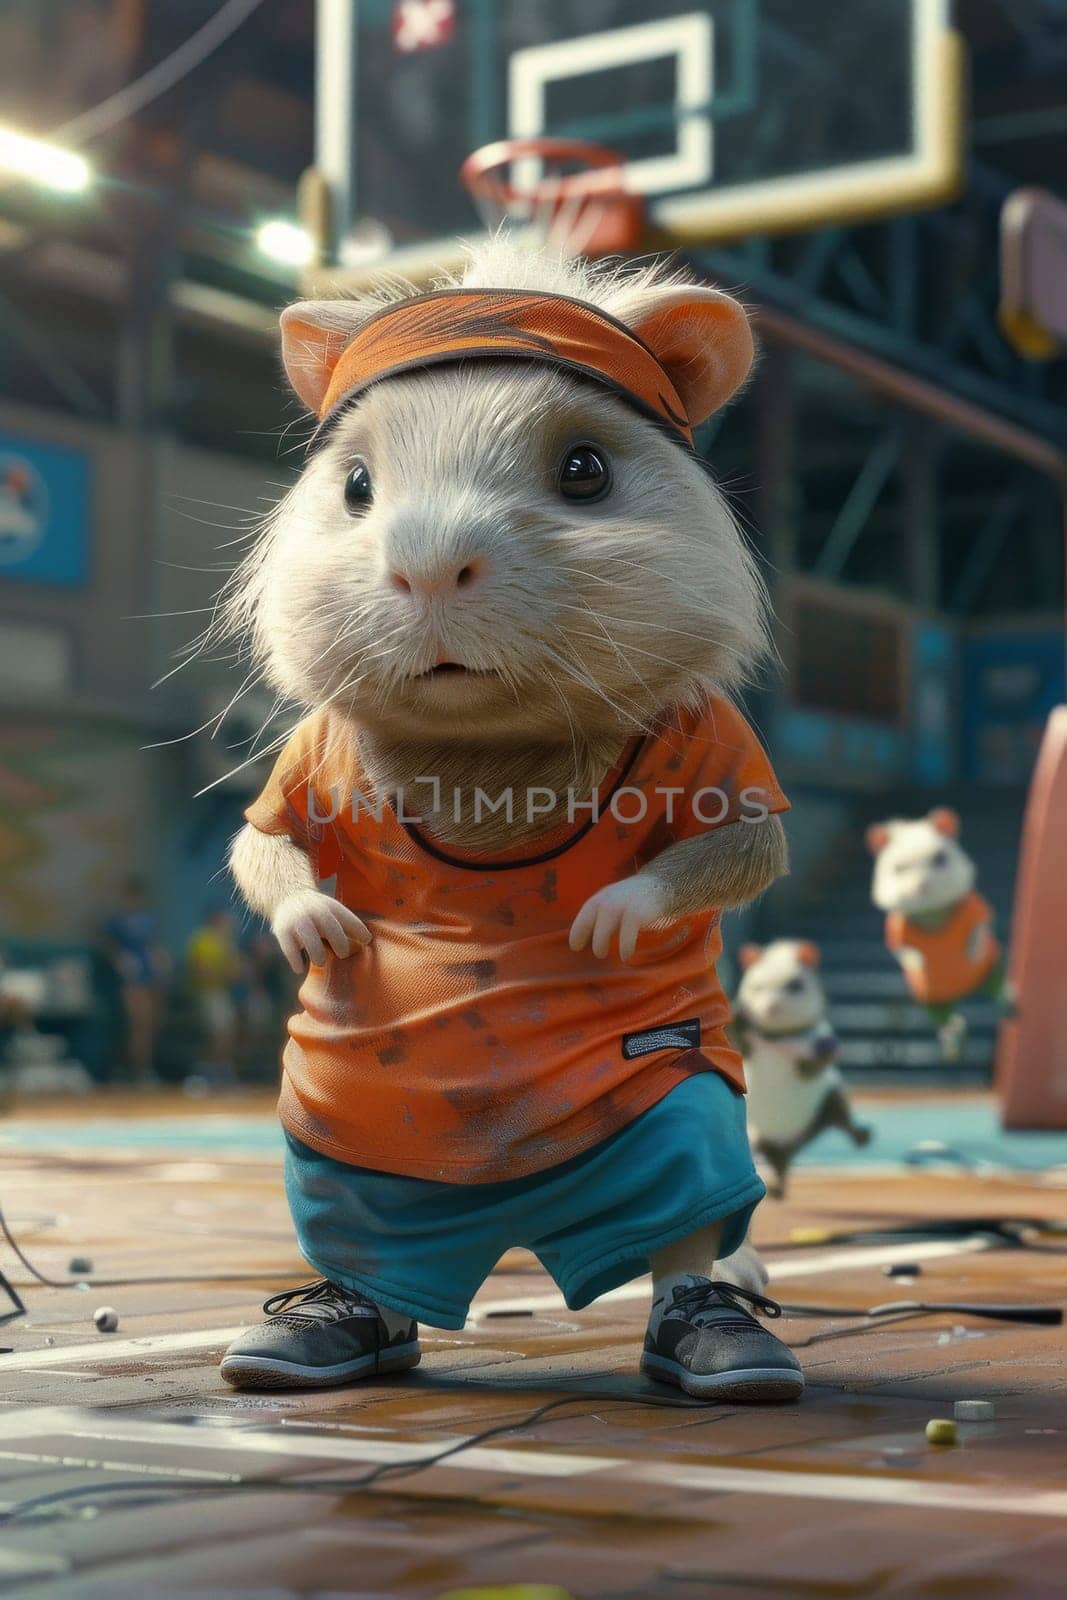 A cartoon of a hamster wearing an orange shirt and blue shorts. The hamster is standing on a basketball court